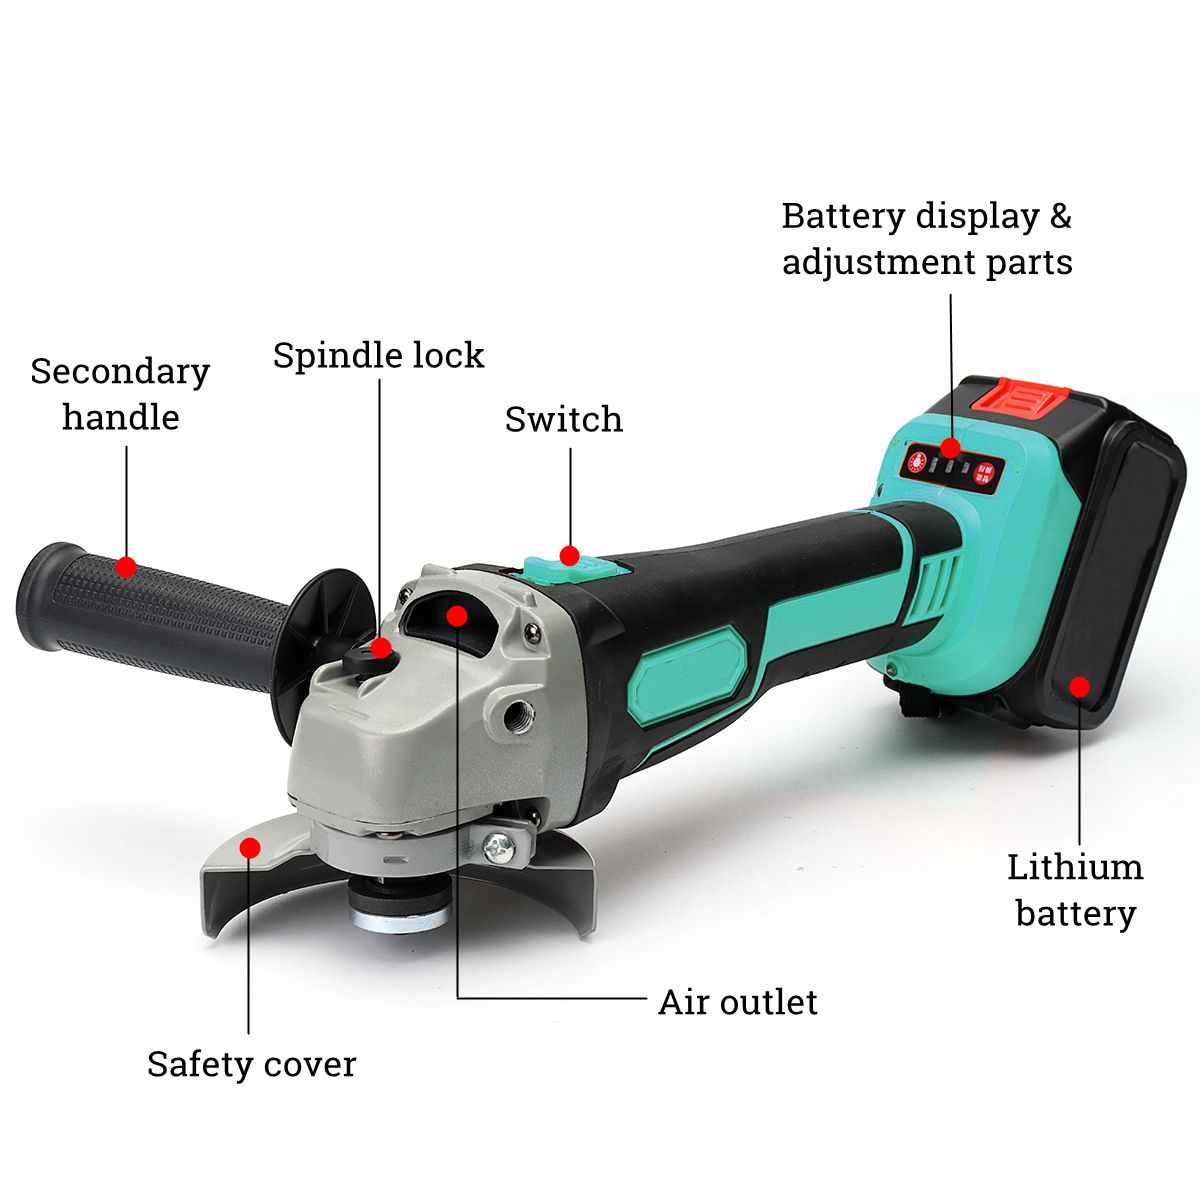 188VF218VF-Brushless-Cordless-Angle-Grinder-Electric-Power-Polishing-Cutting-W-1-or-2-Li-ion-Battery-1431416